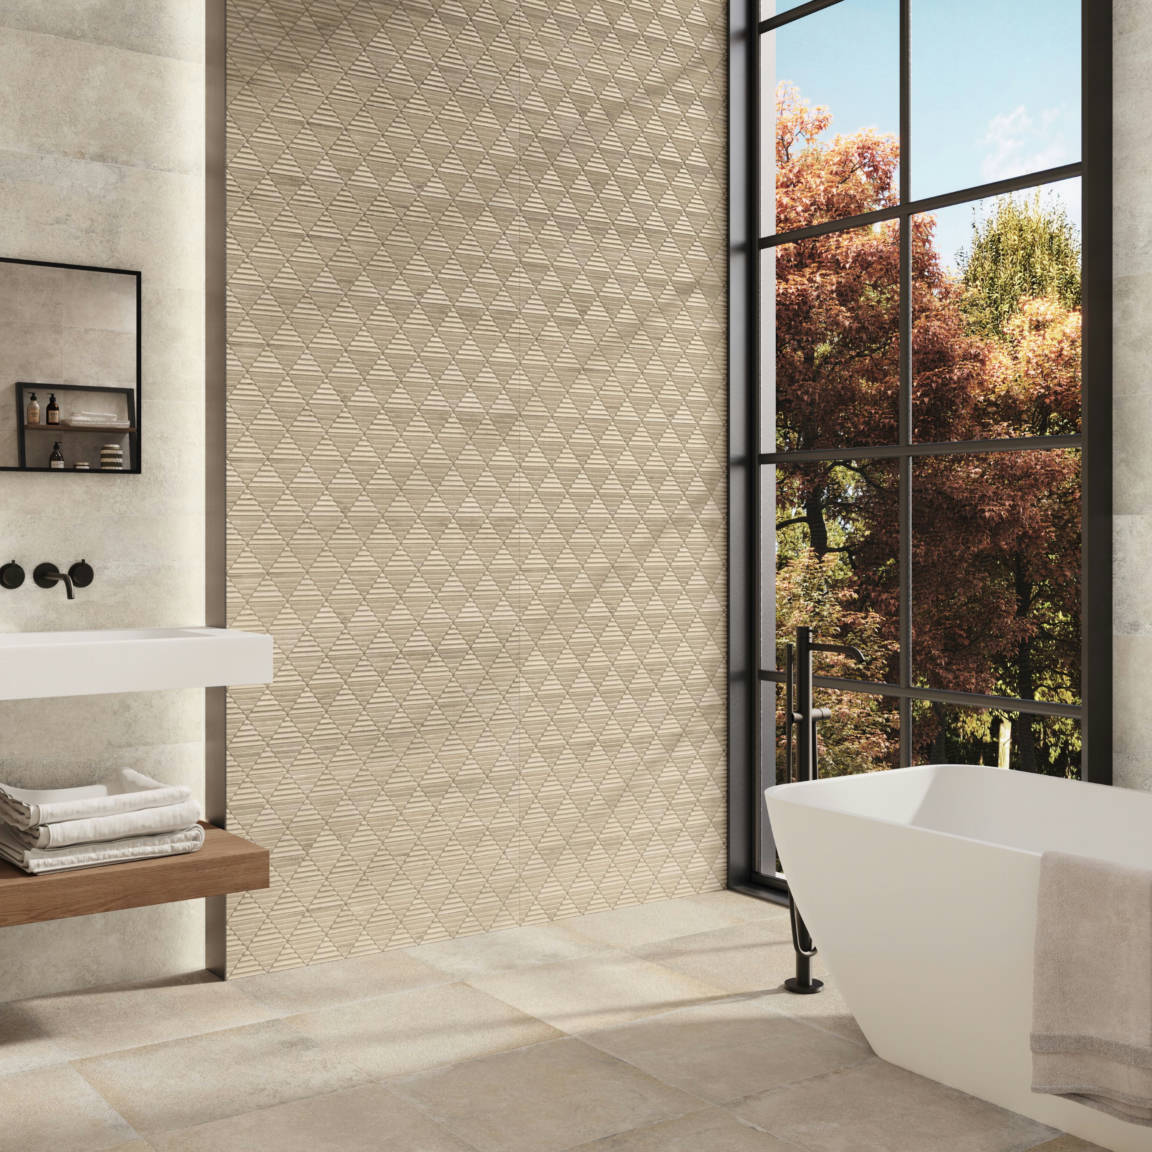 Guiza_3_G | Stones And More | Finest selection of Mosaics, Glass, Tile and Stone